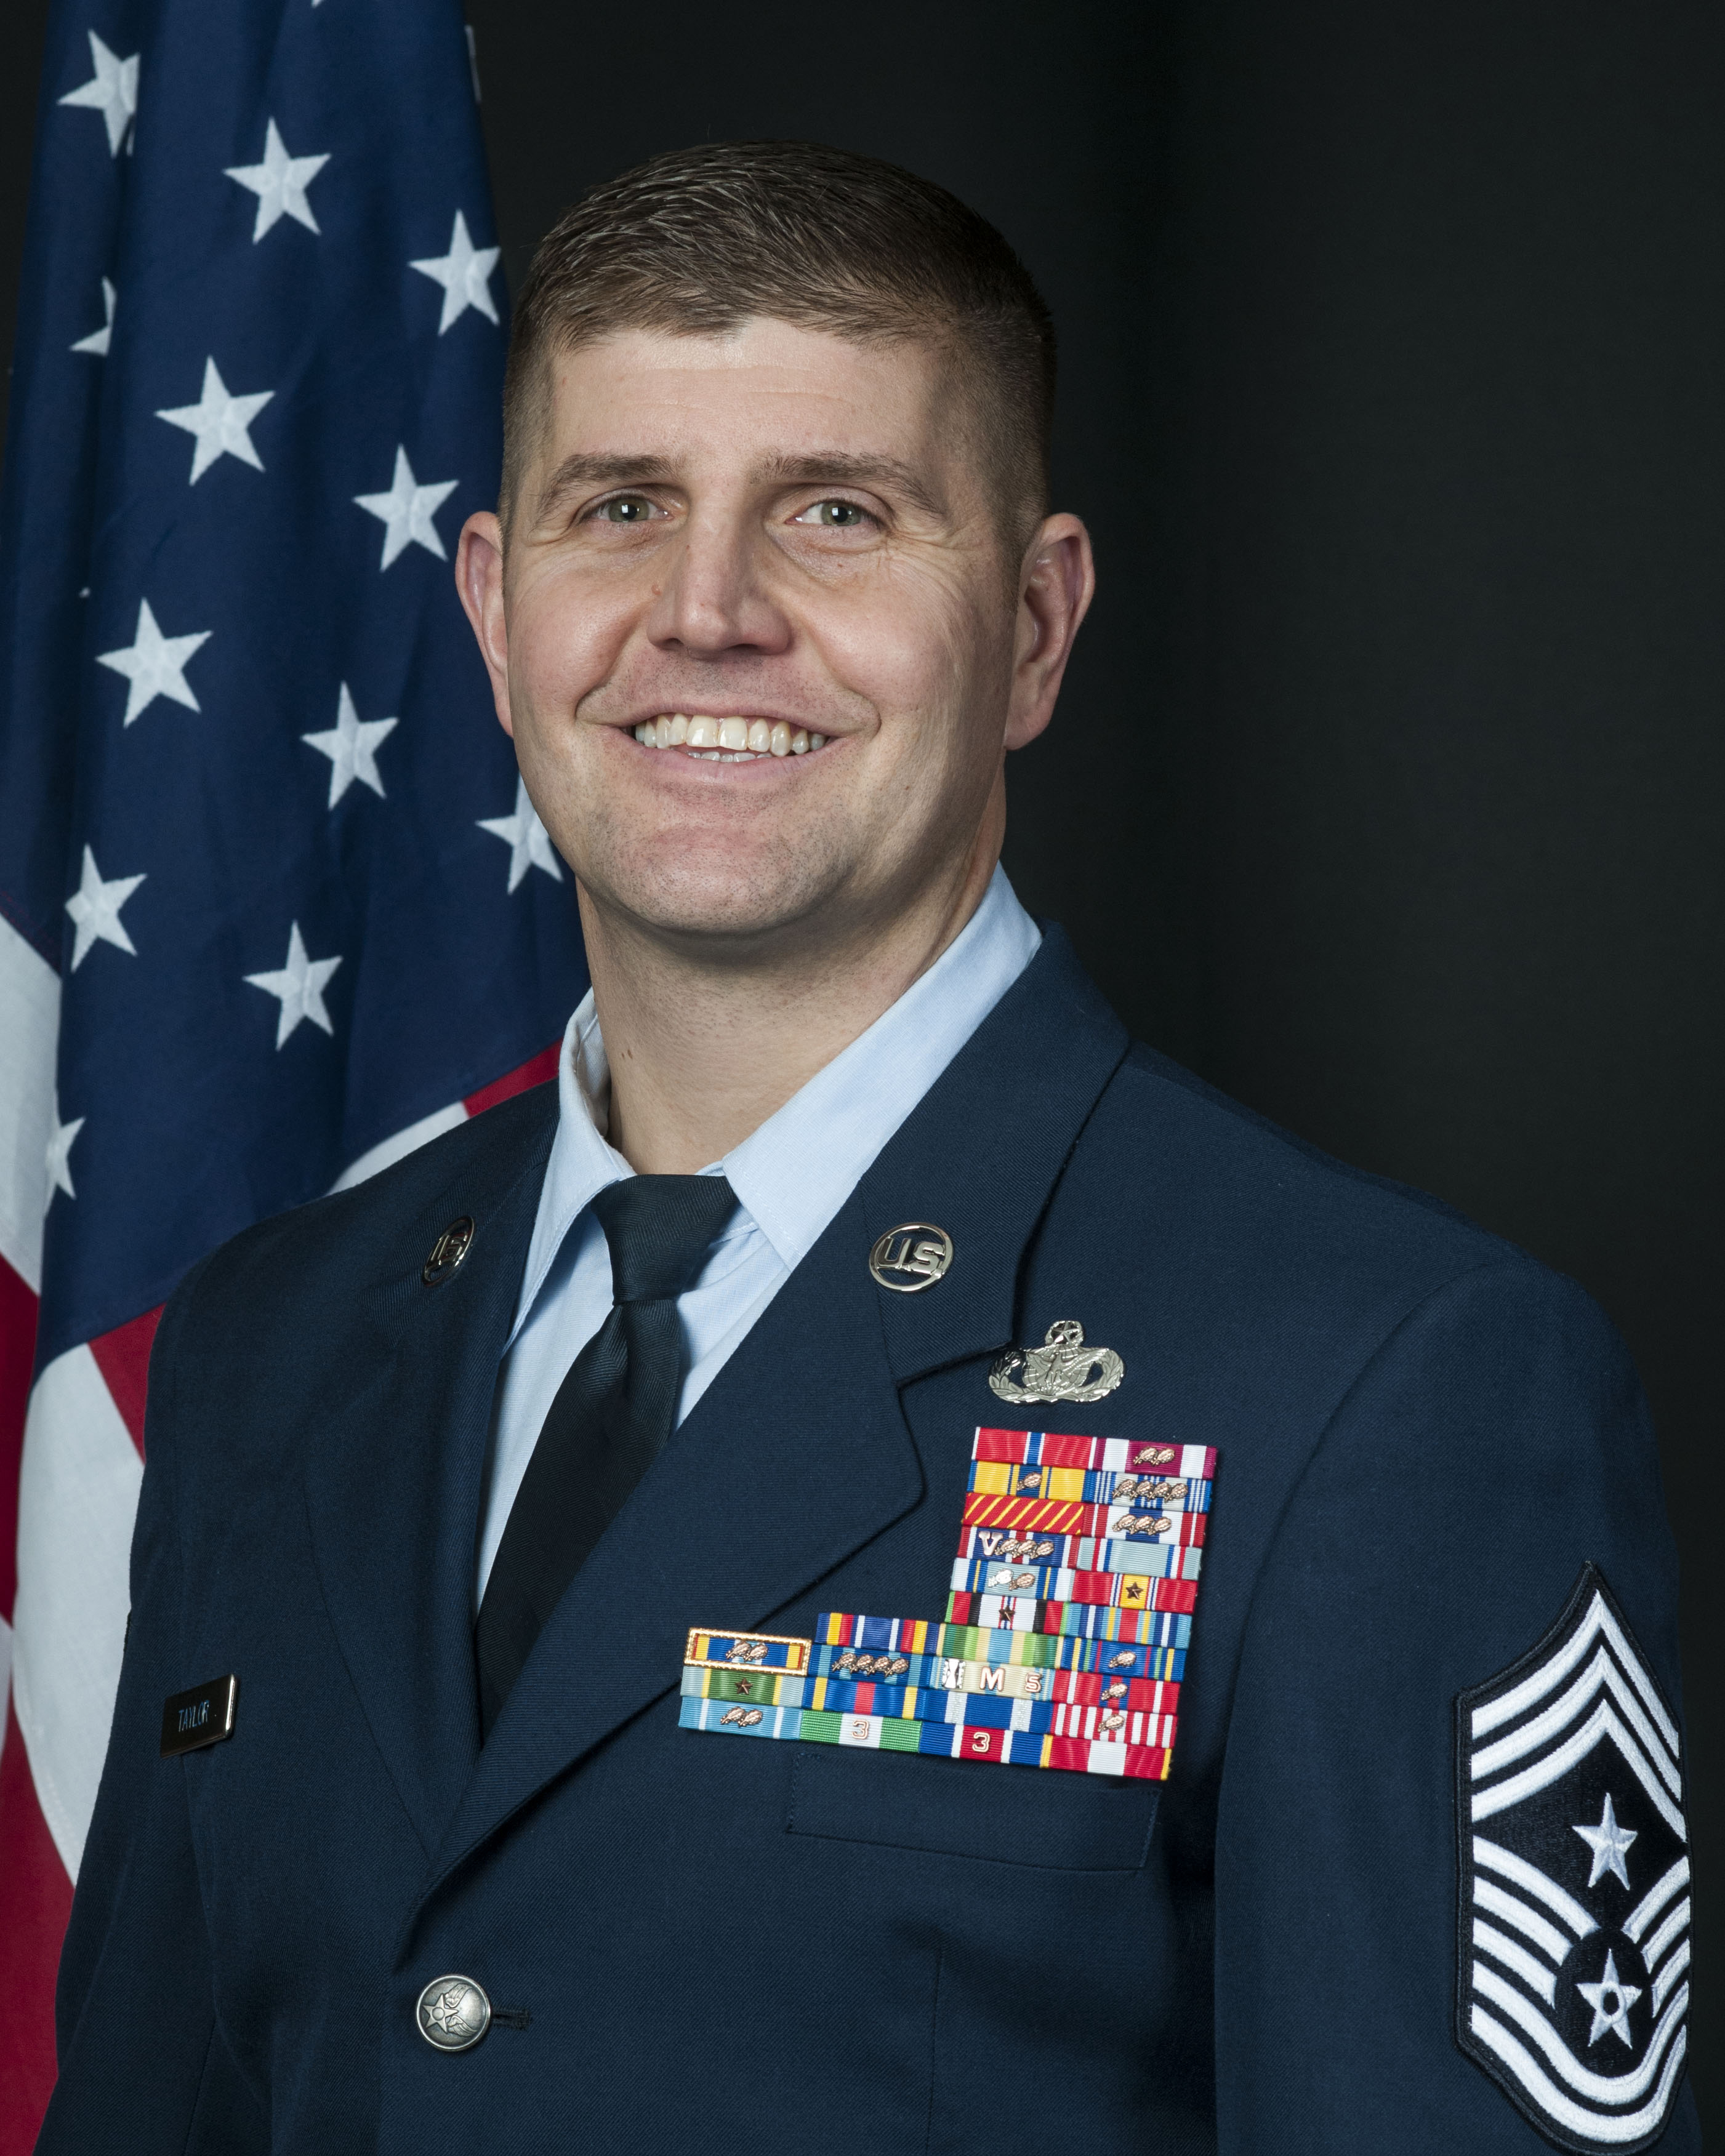 Official photograph for Ohio Air National Guard State Command Chief
